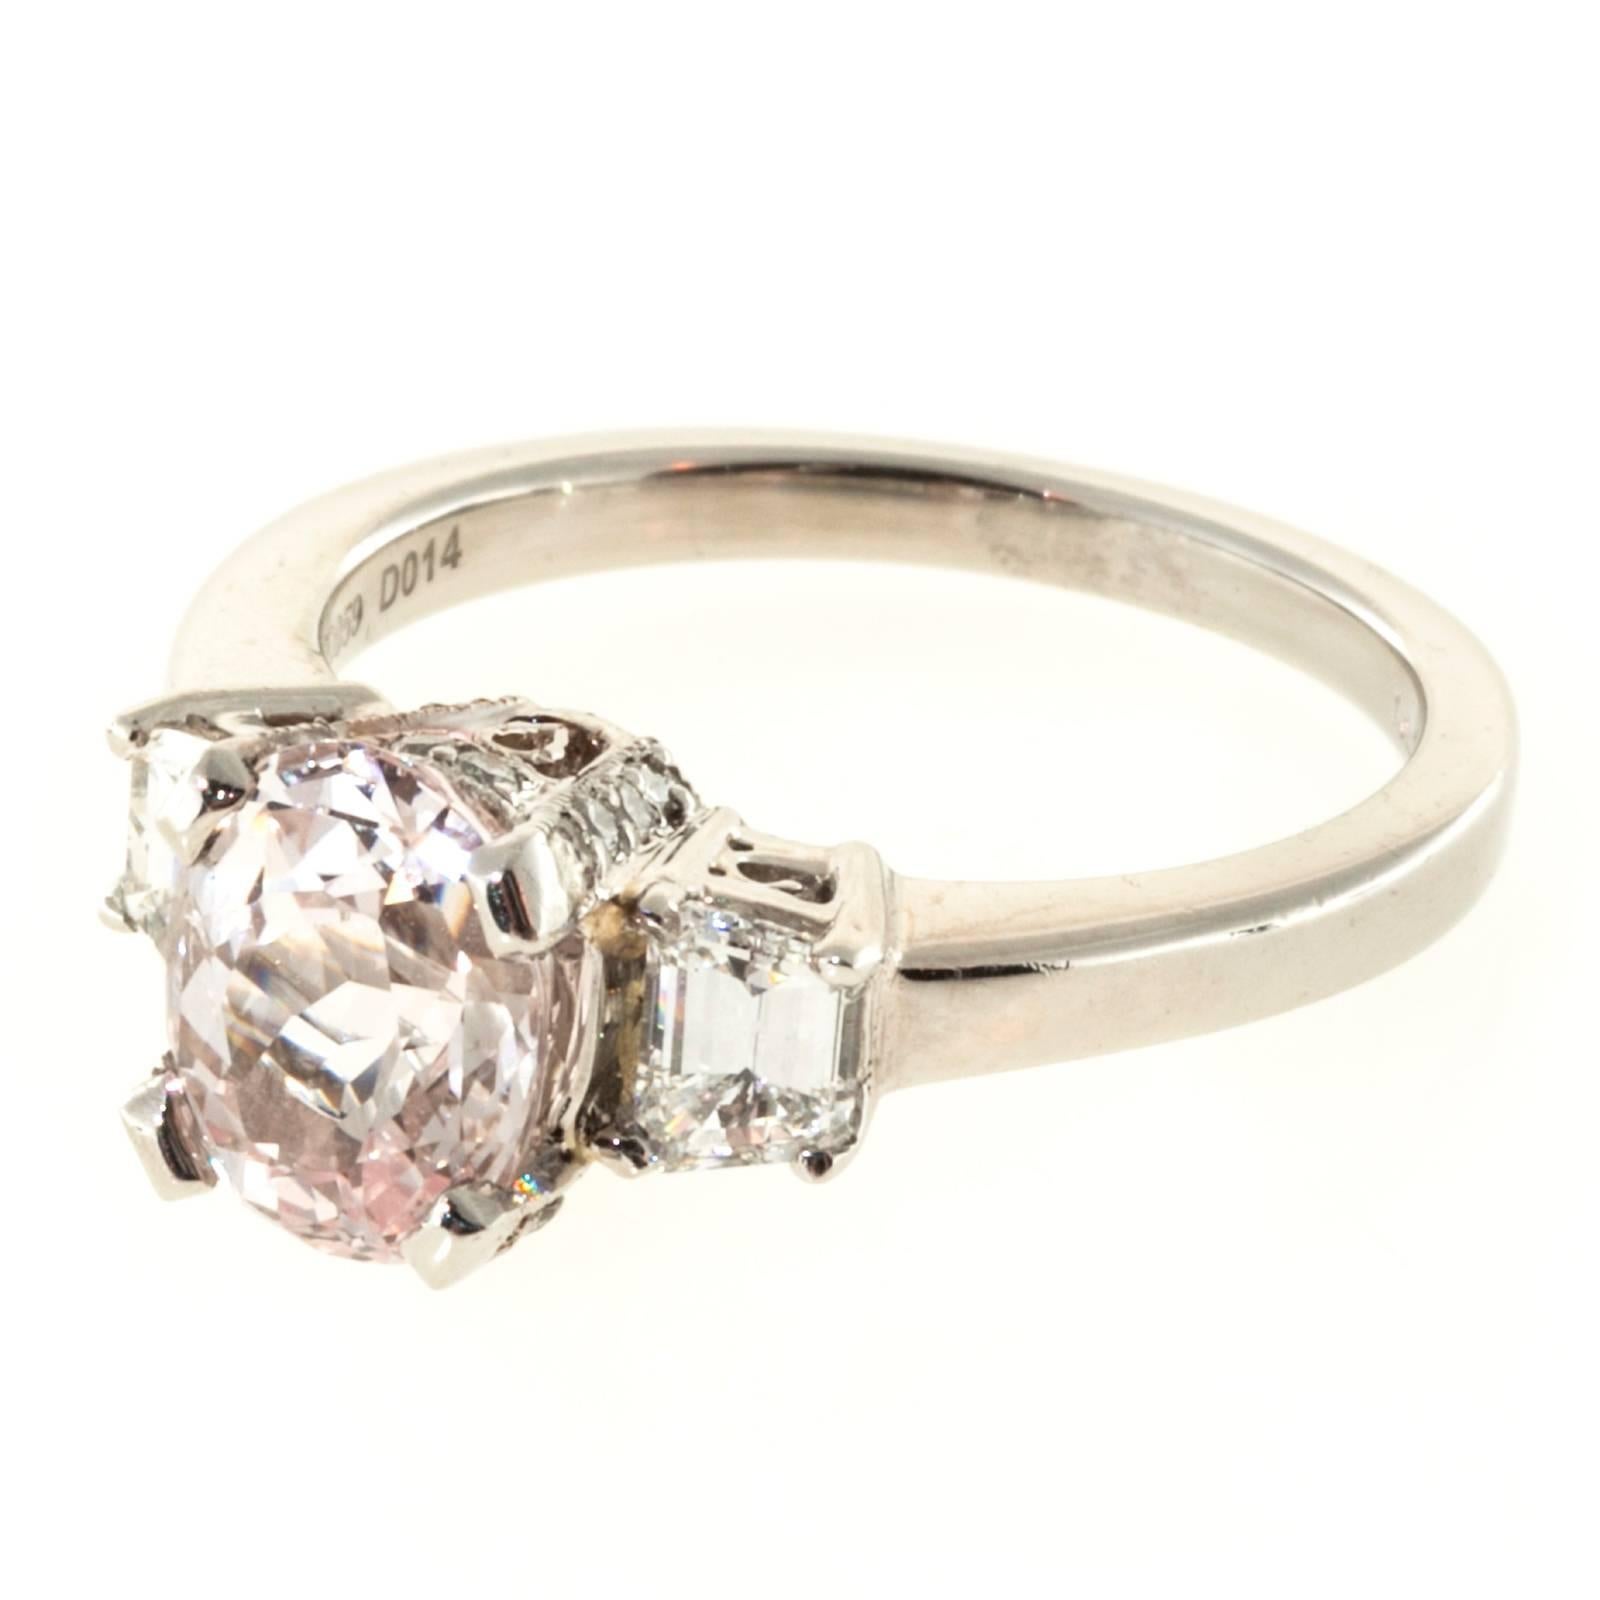 GIA certified natural light peach/orange Sapphire and diamond engagement ring. 2.22 cts center sapphire in a platinum three-stone setting with accent diamonds along the crown.  

1 Light peach / orange oval Sapphire, approx. total weight 2.22cts,